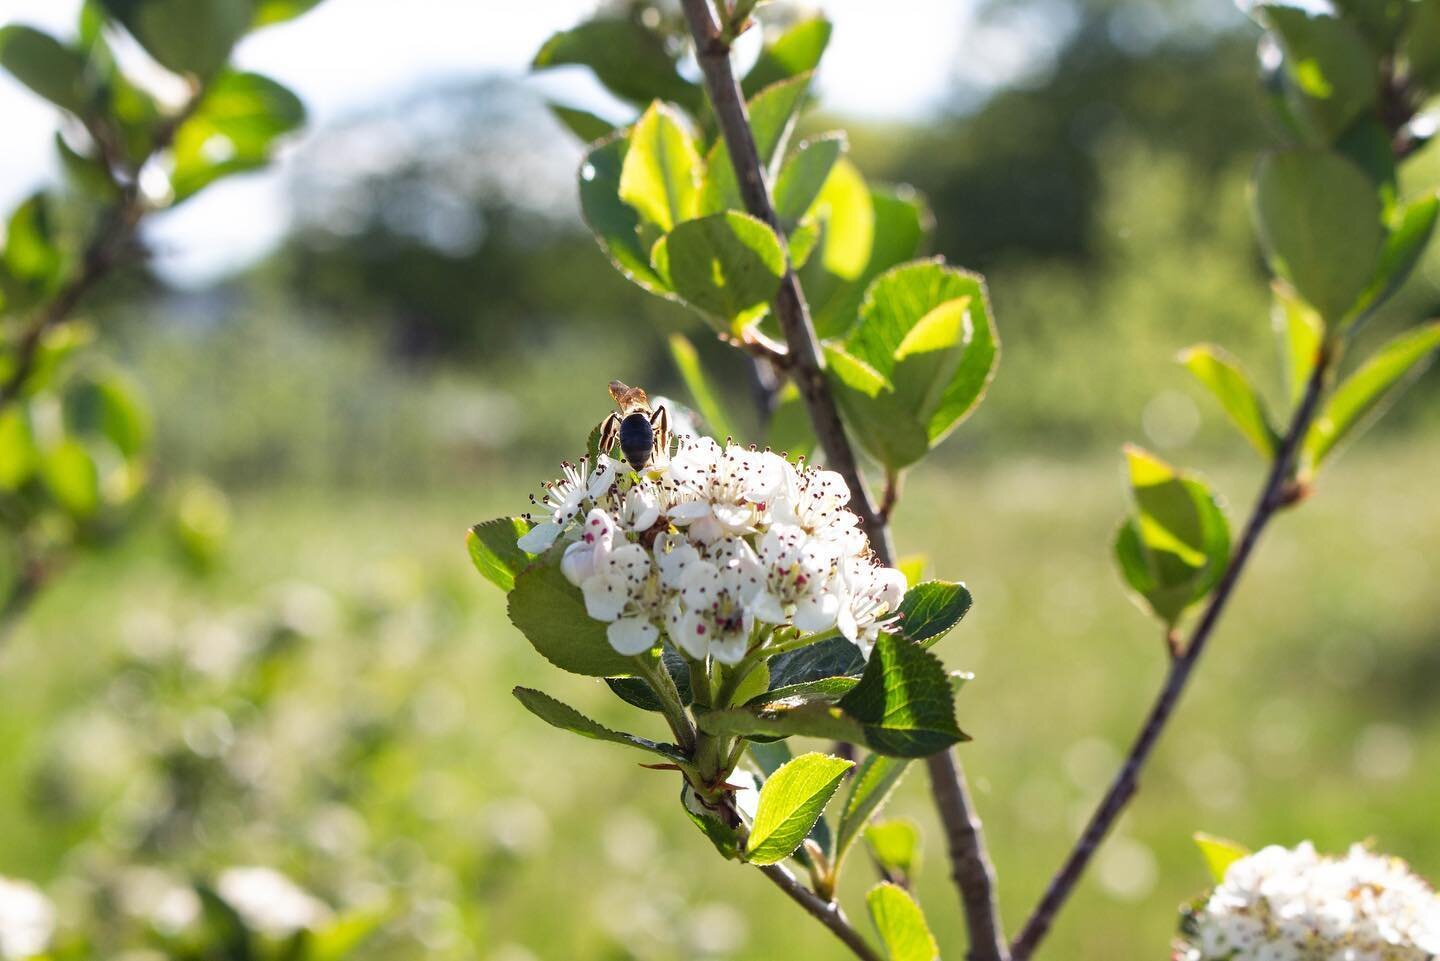 Pownal, Maine // a moment of pollination in the orchards @portersfield_cider 
#pollination #cider #slowfood